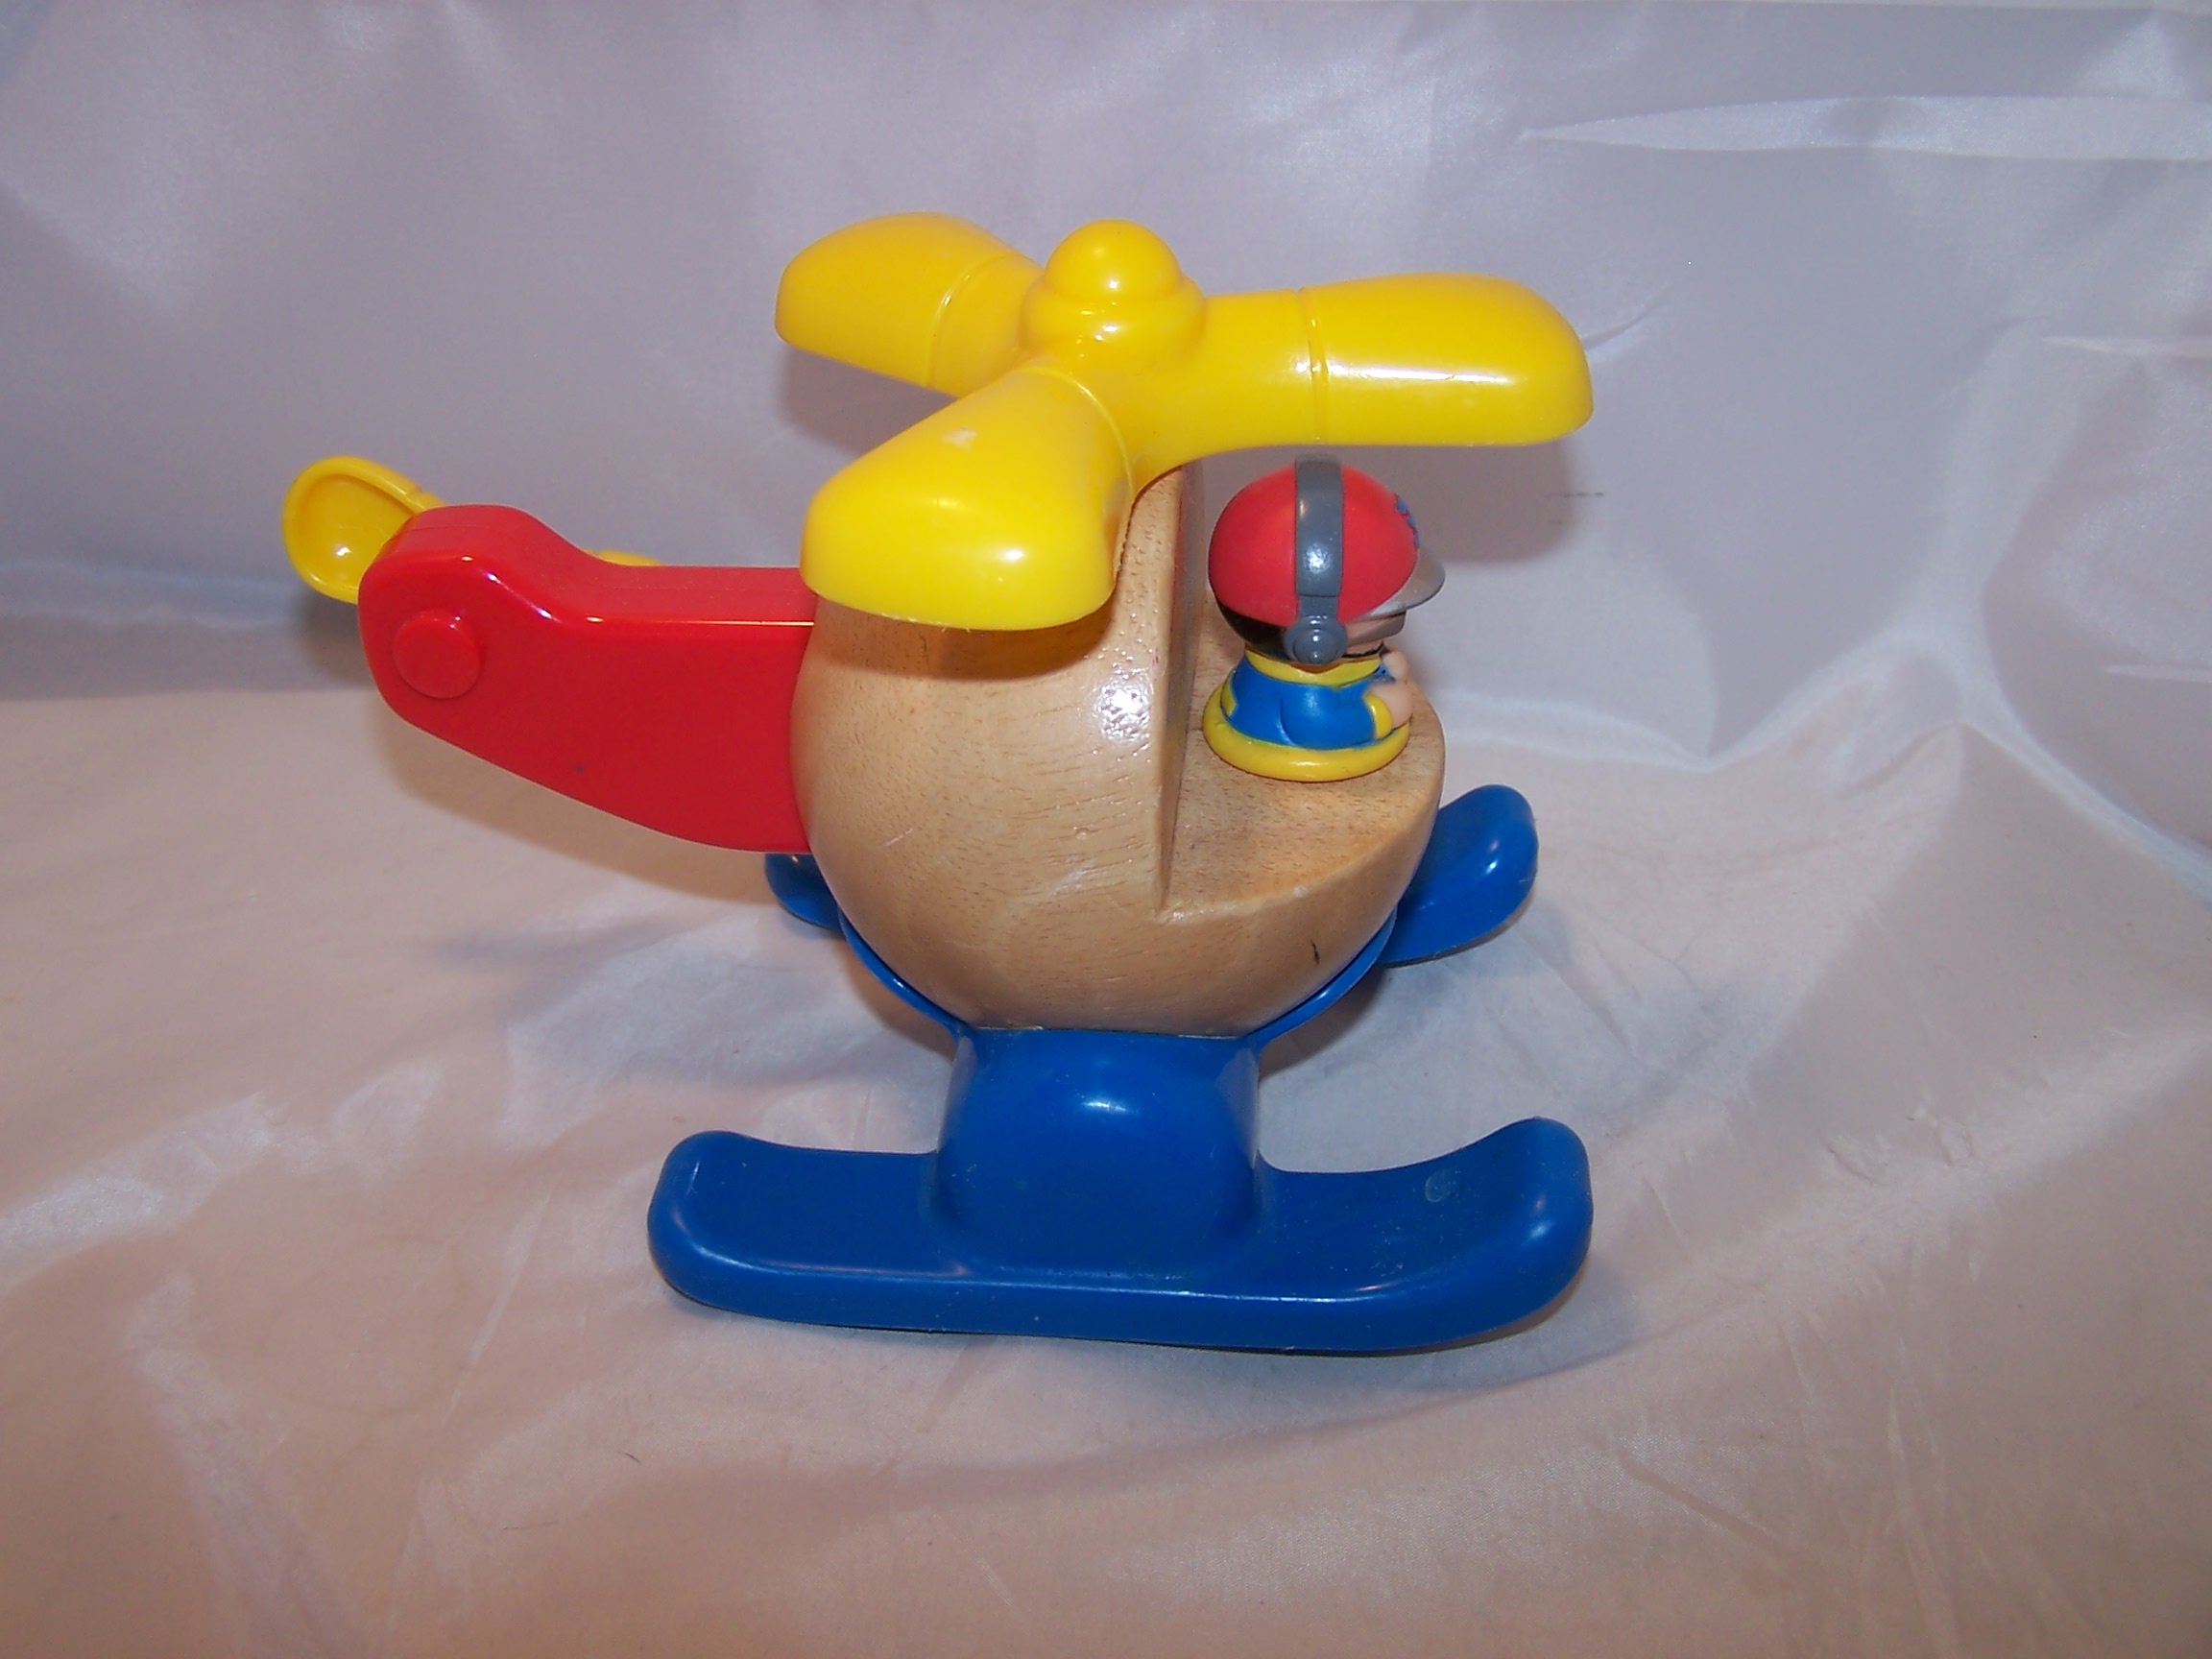 Image 3 of Little Tikes Helicopter w Pilot, Wood, Plastic, Yellow, Blue, Red